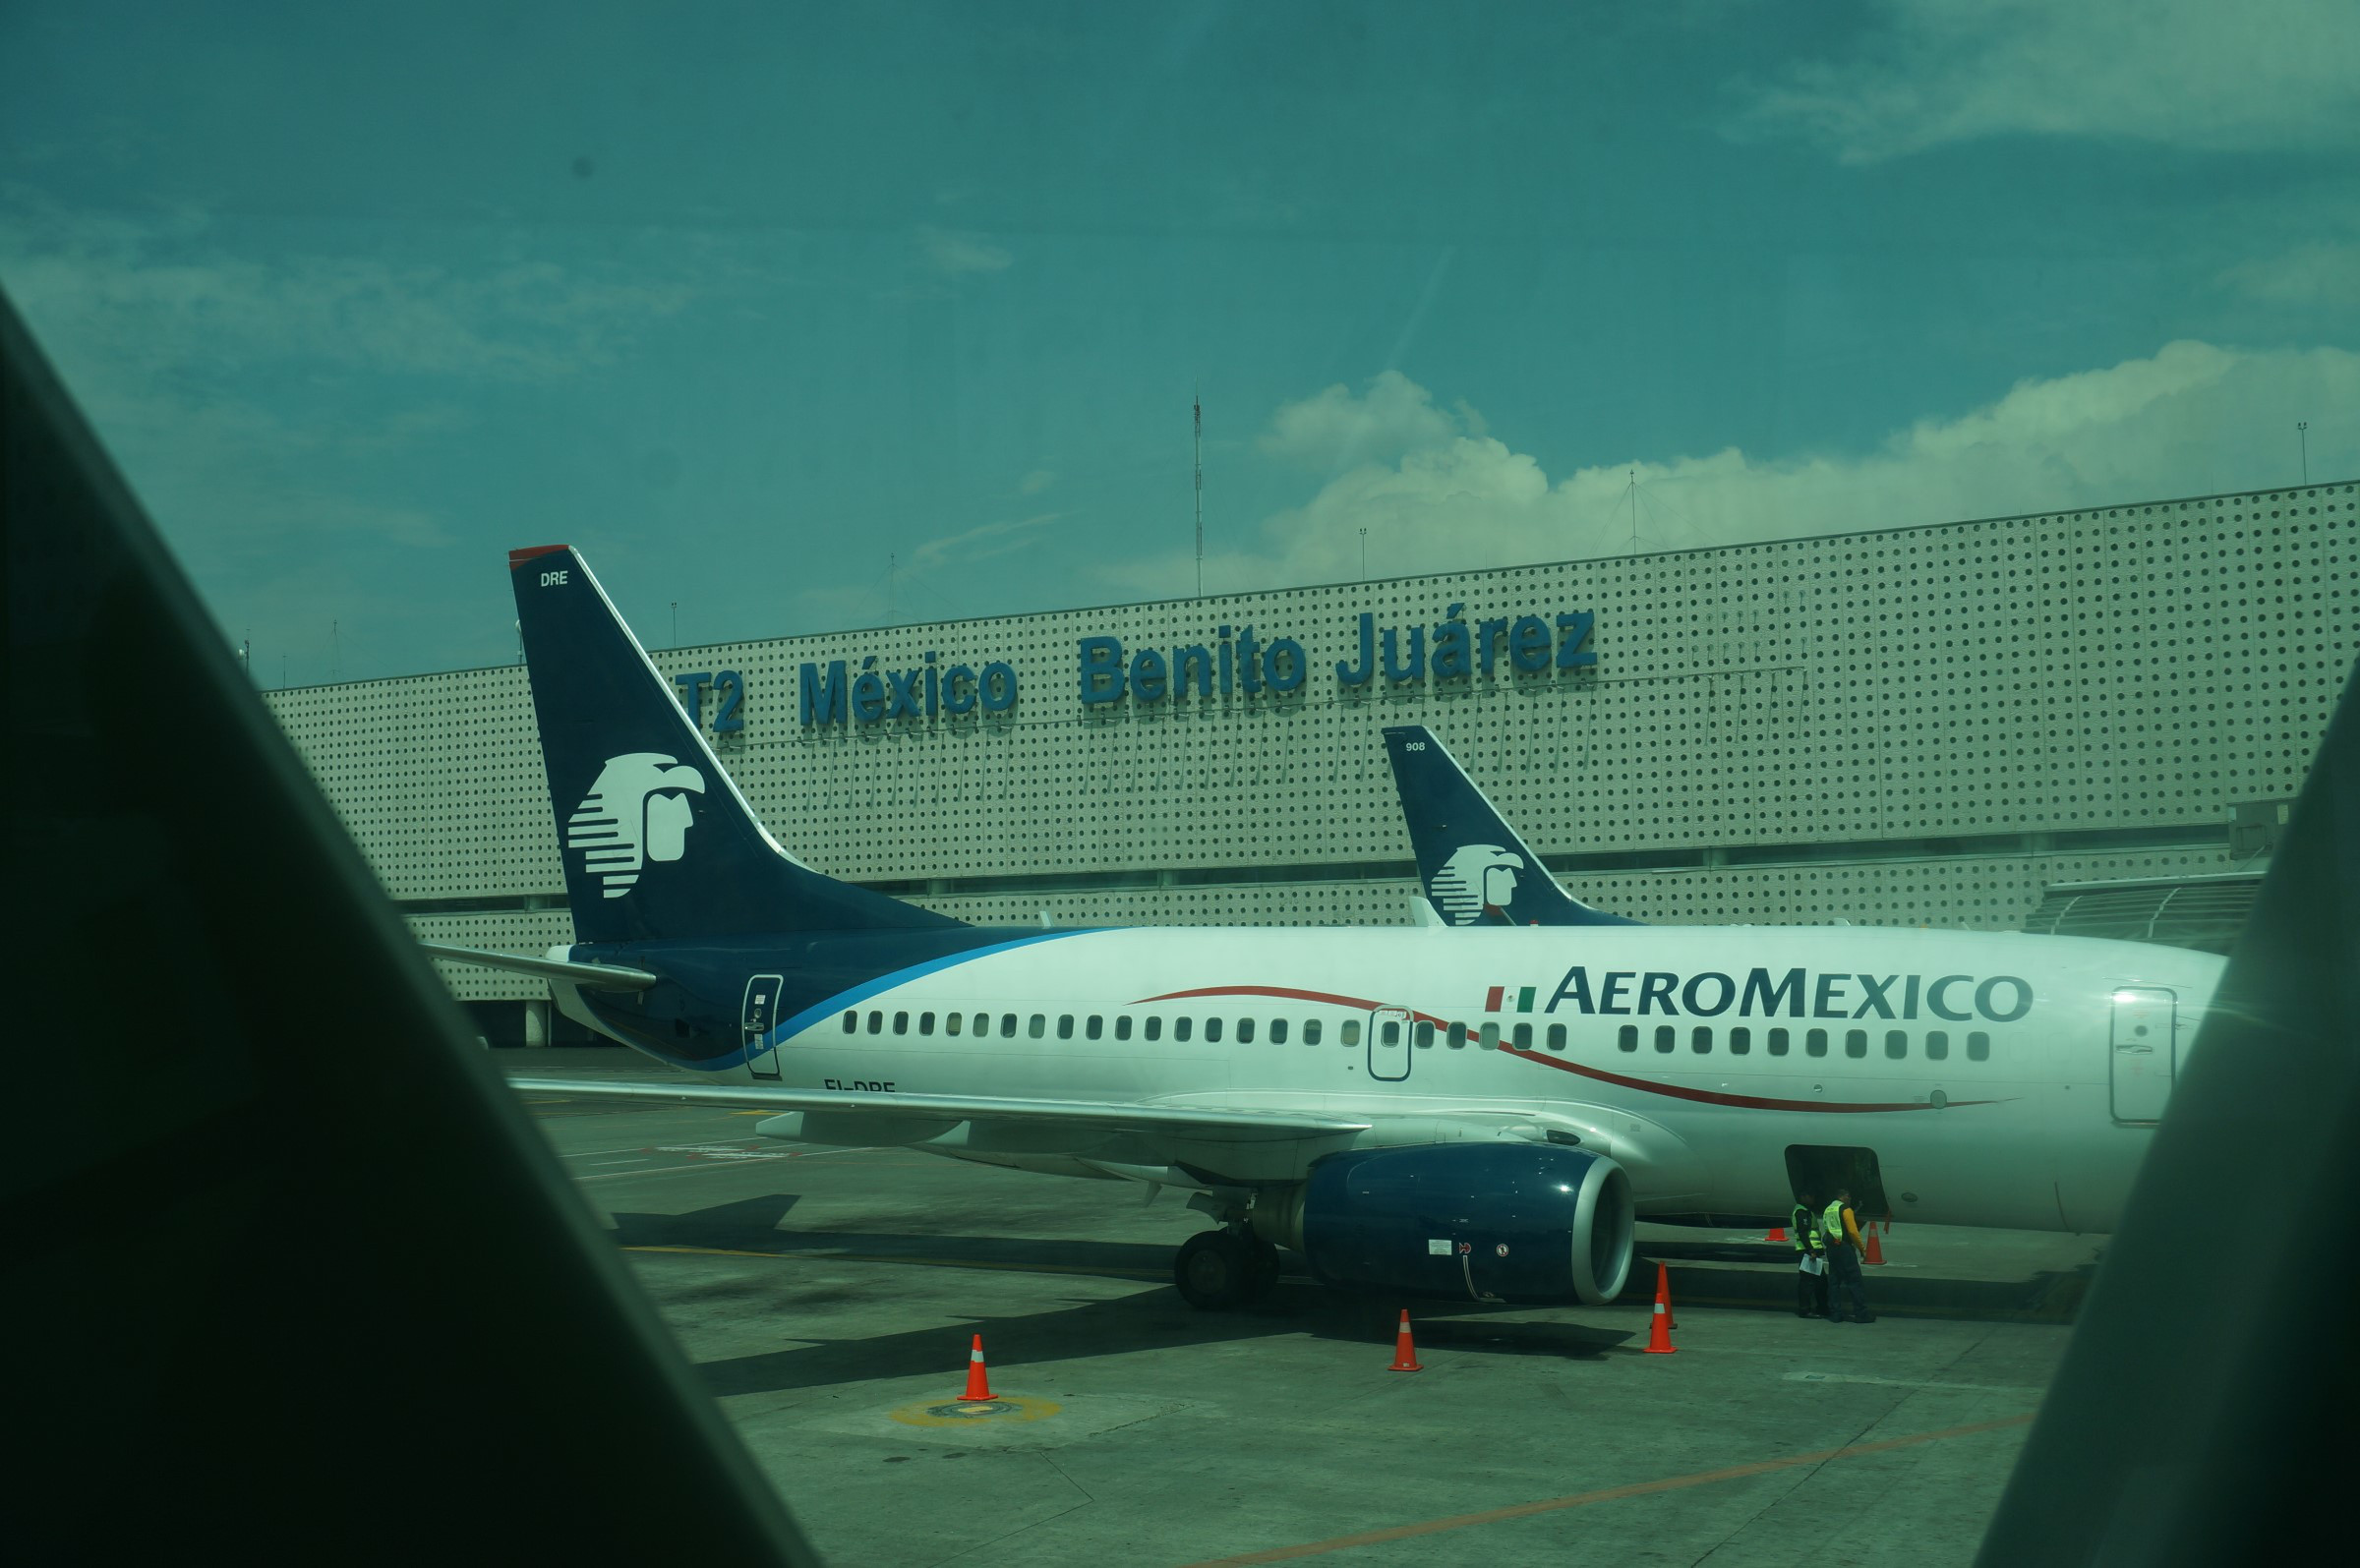 mexico city international airport getty images